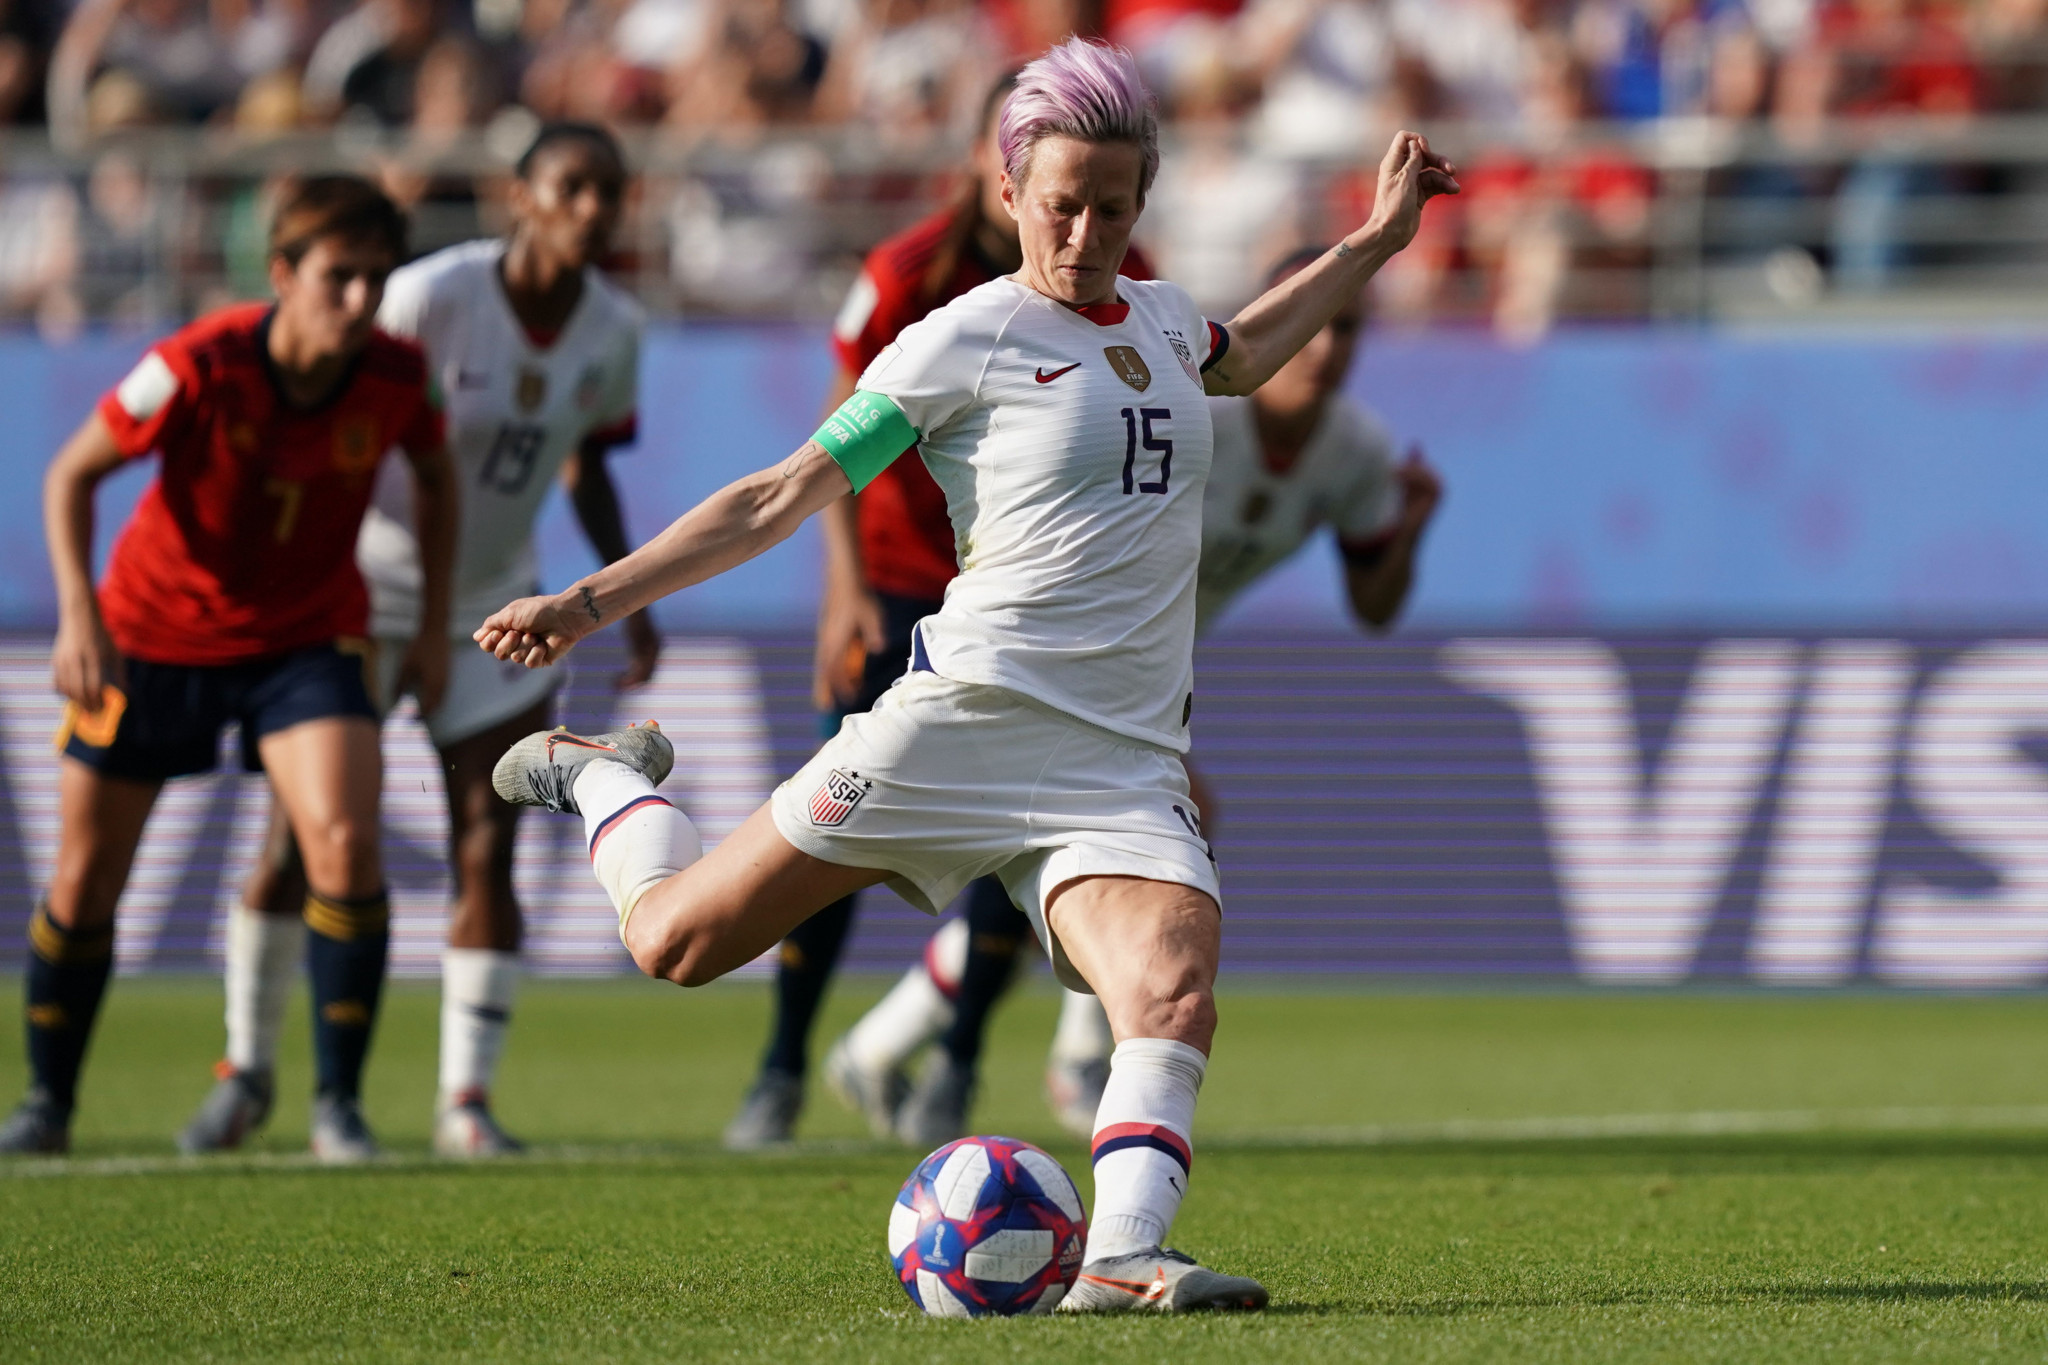 Megan Rapinoe scored twice from the penalty spot as defending champions the United States progressed through to the FIFA Women's World Cup quarter-finals with an unconvincing 2-1 win over Spain in Reims ©Getty Images